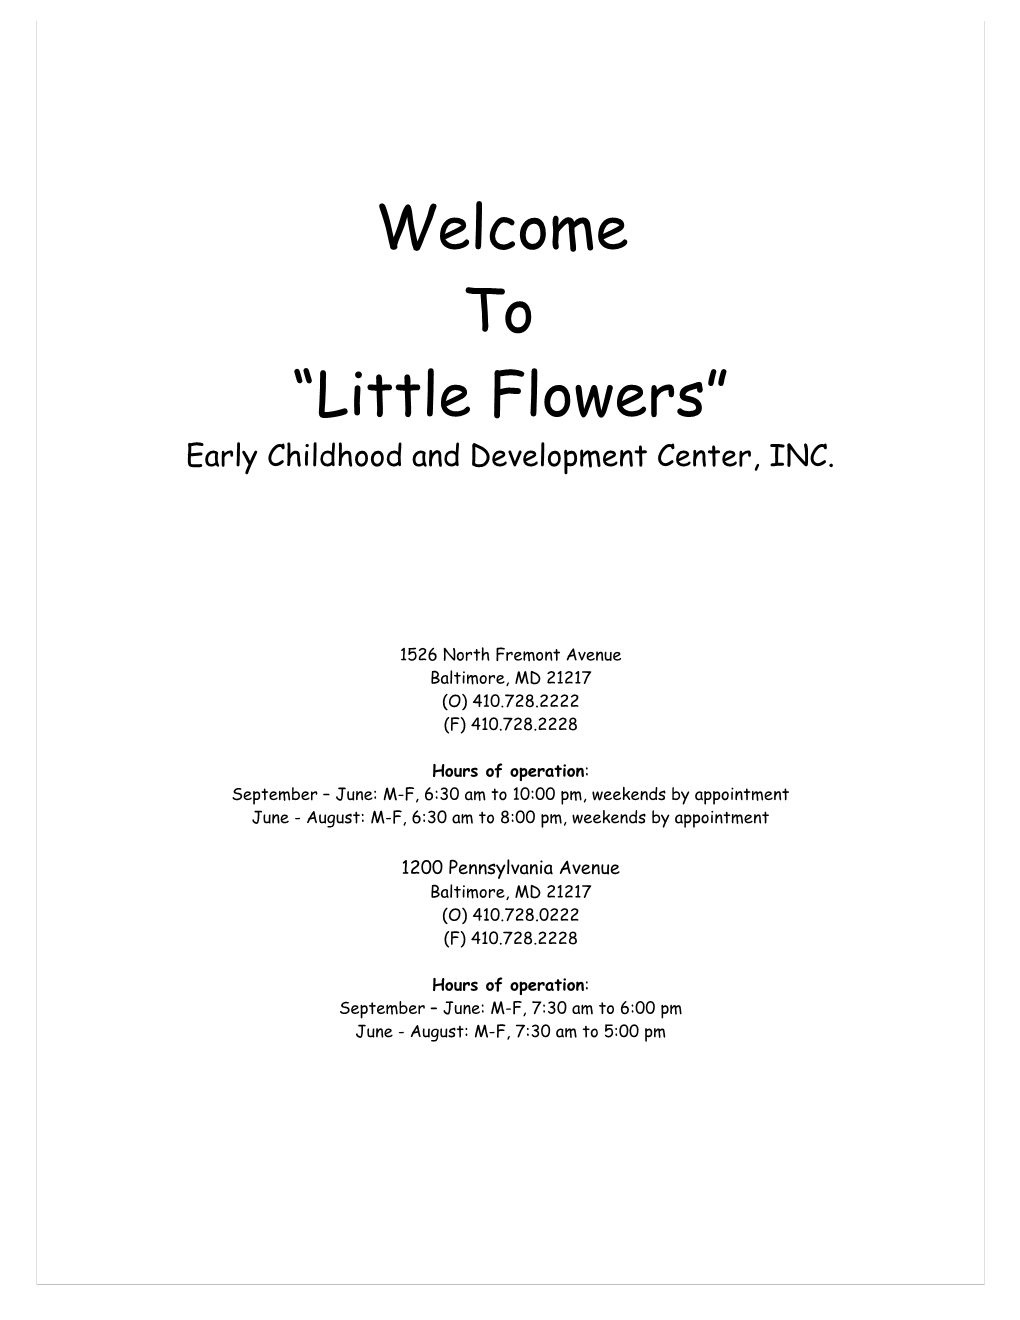 Early Childhood and Development Center, INC